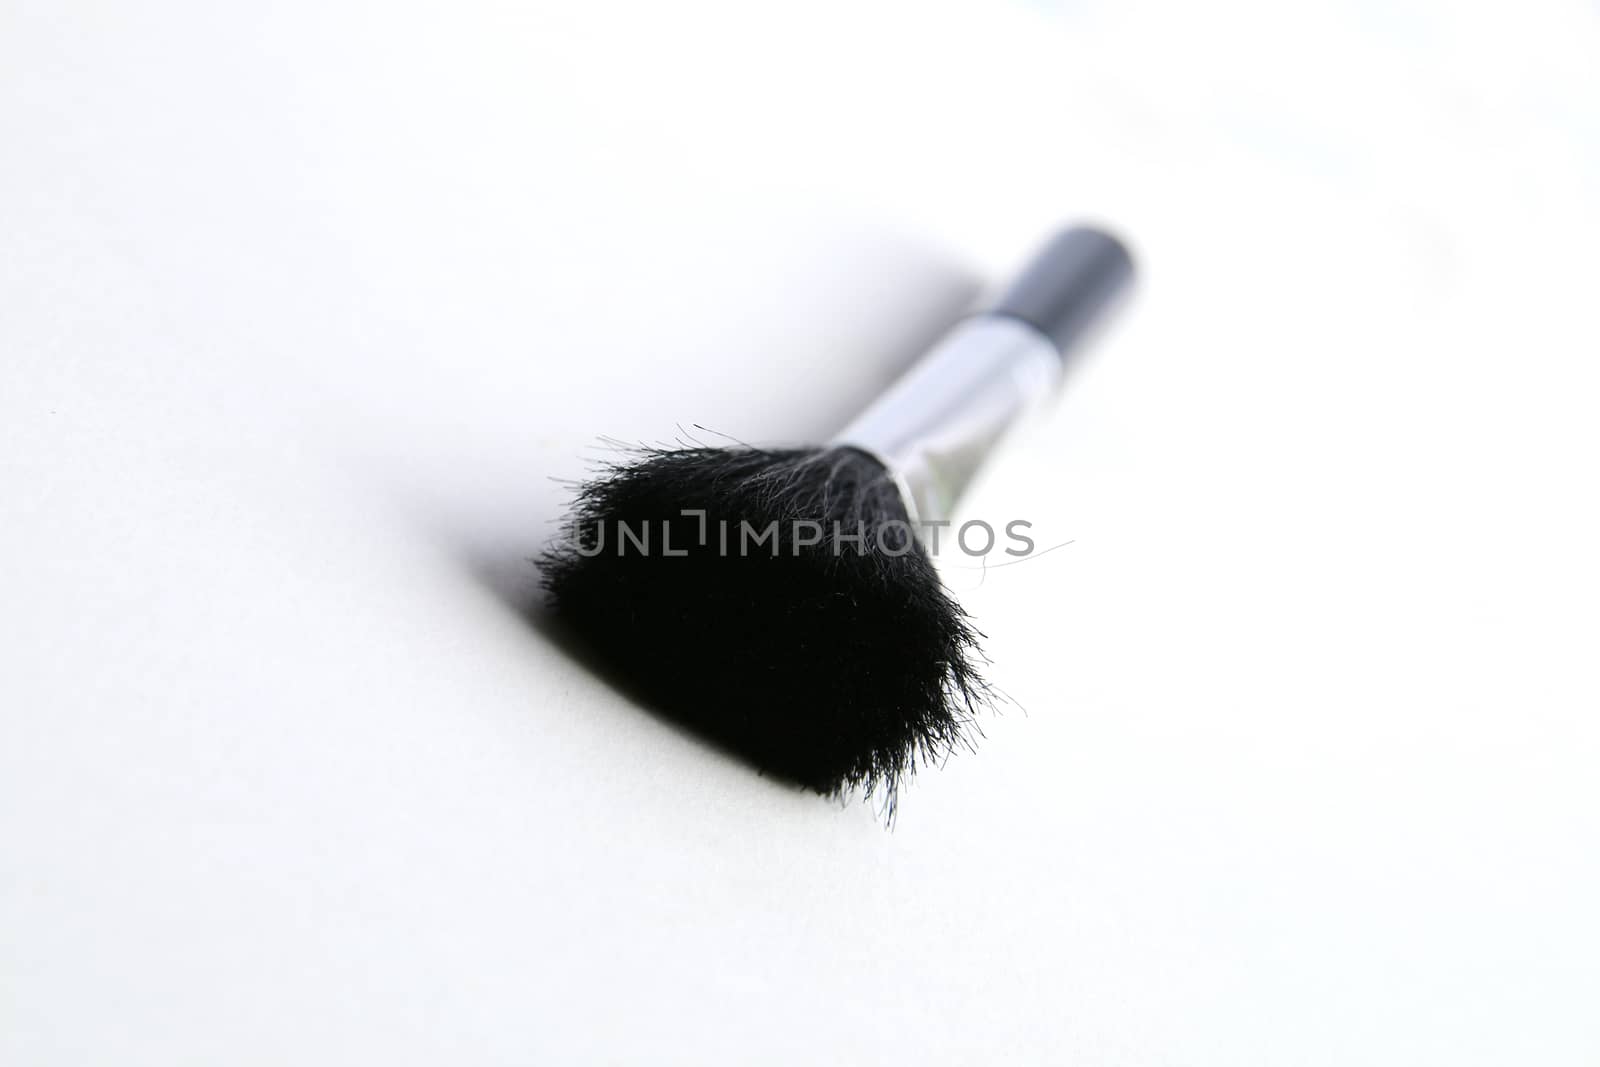 The black brush have metal handle.Use for cleaning cleaning appliance.